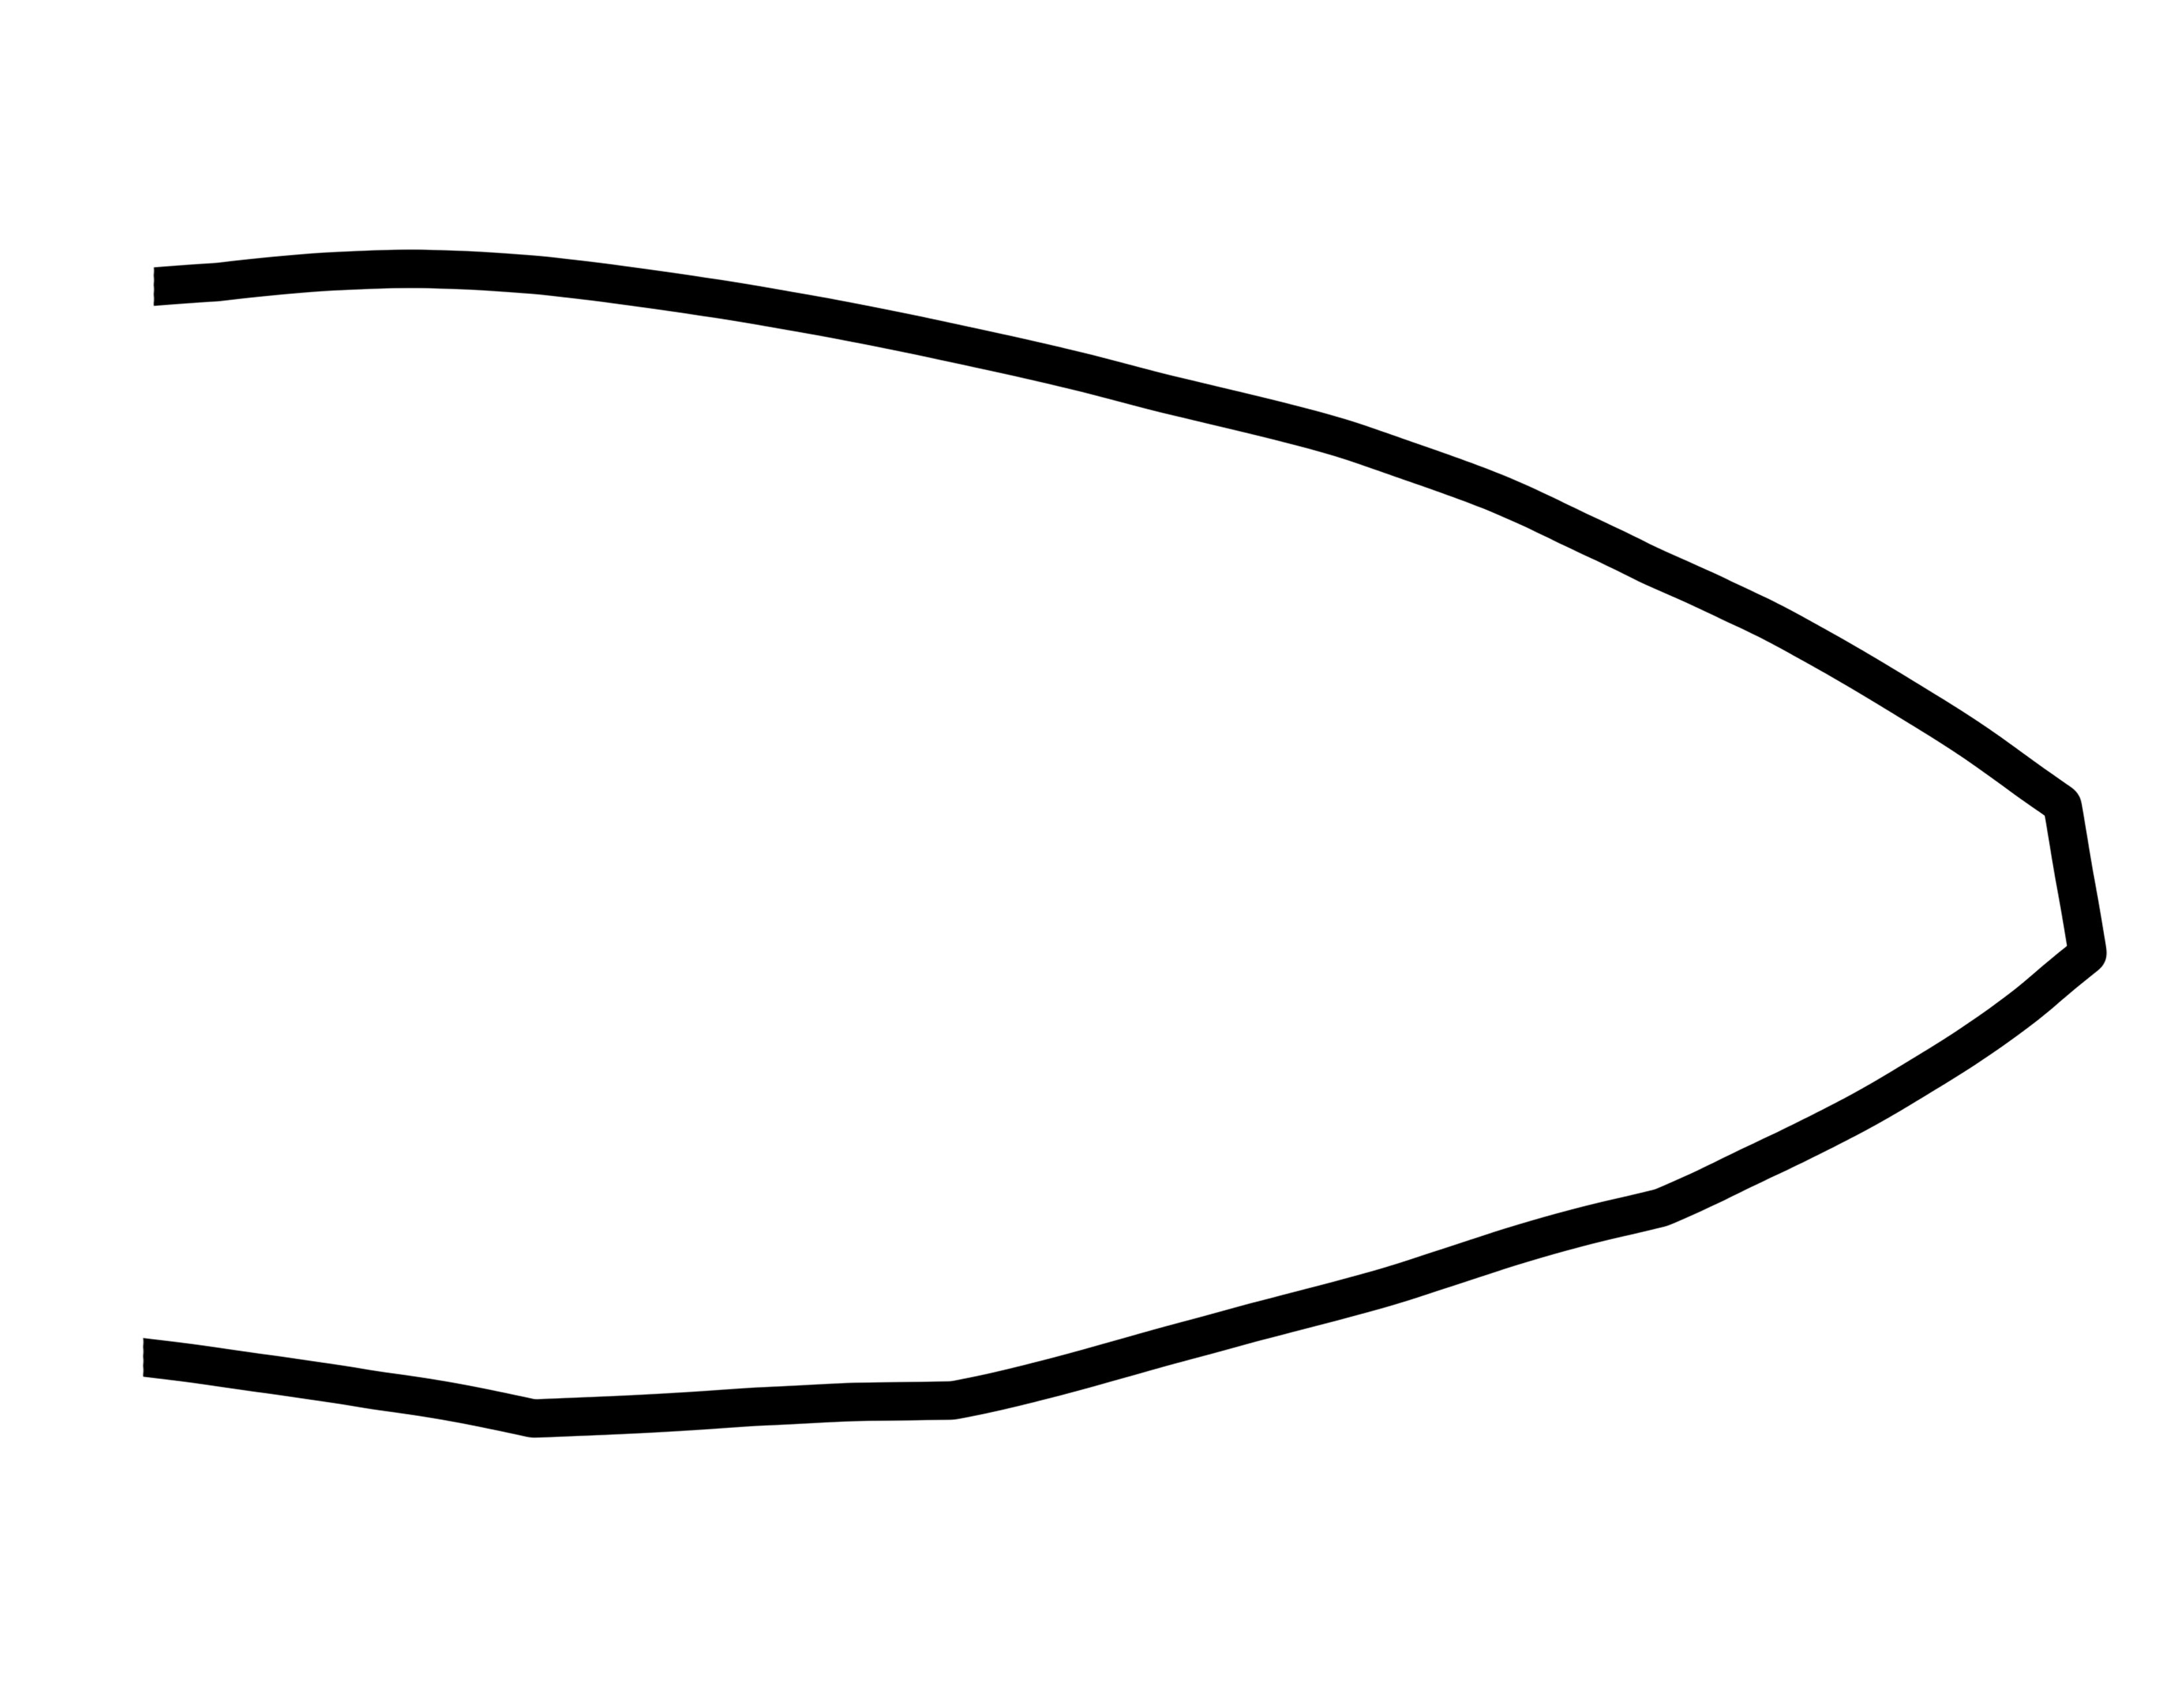 A sewing pattern for the front body of a fish.